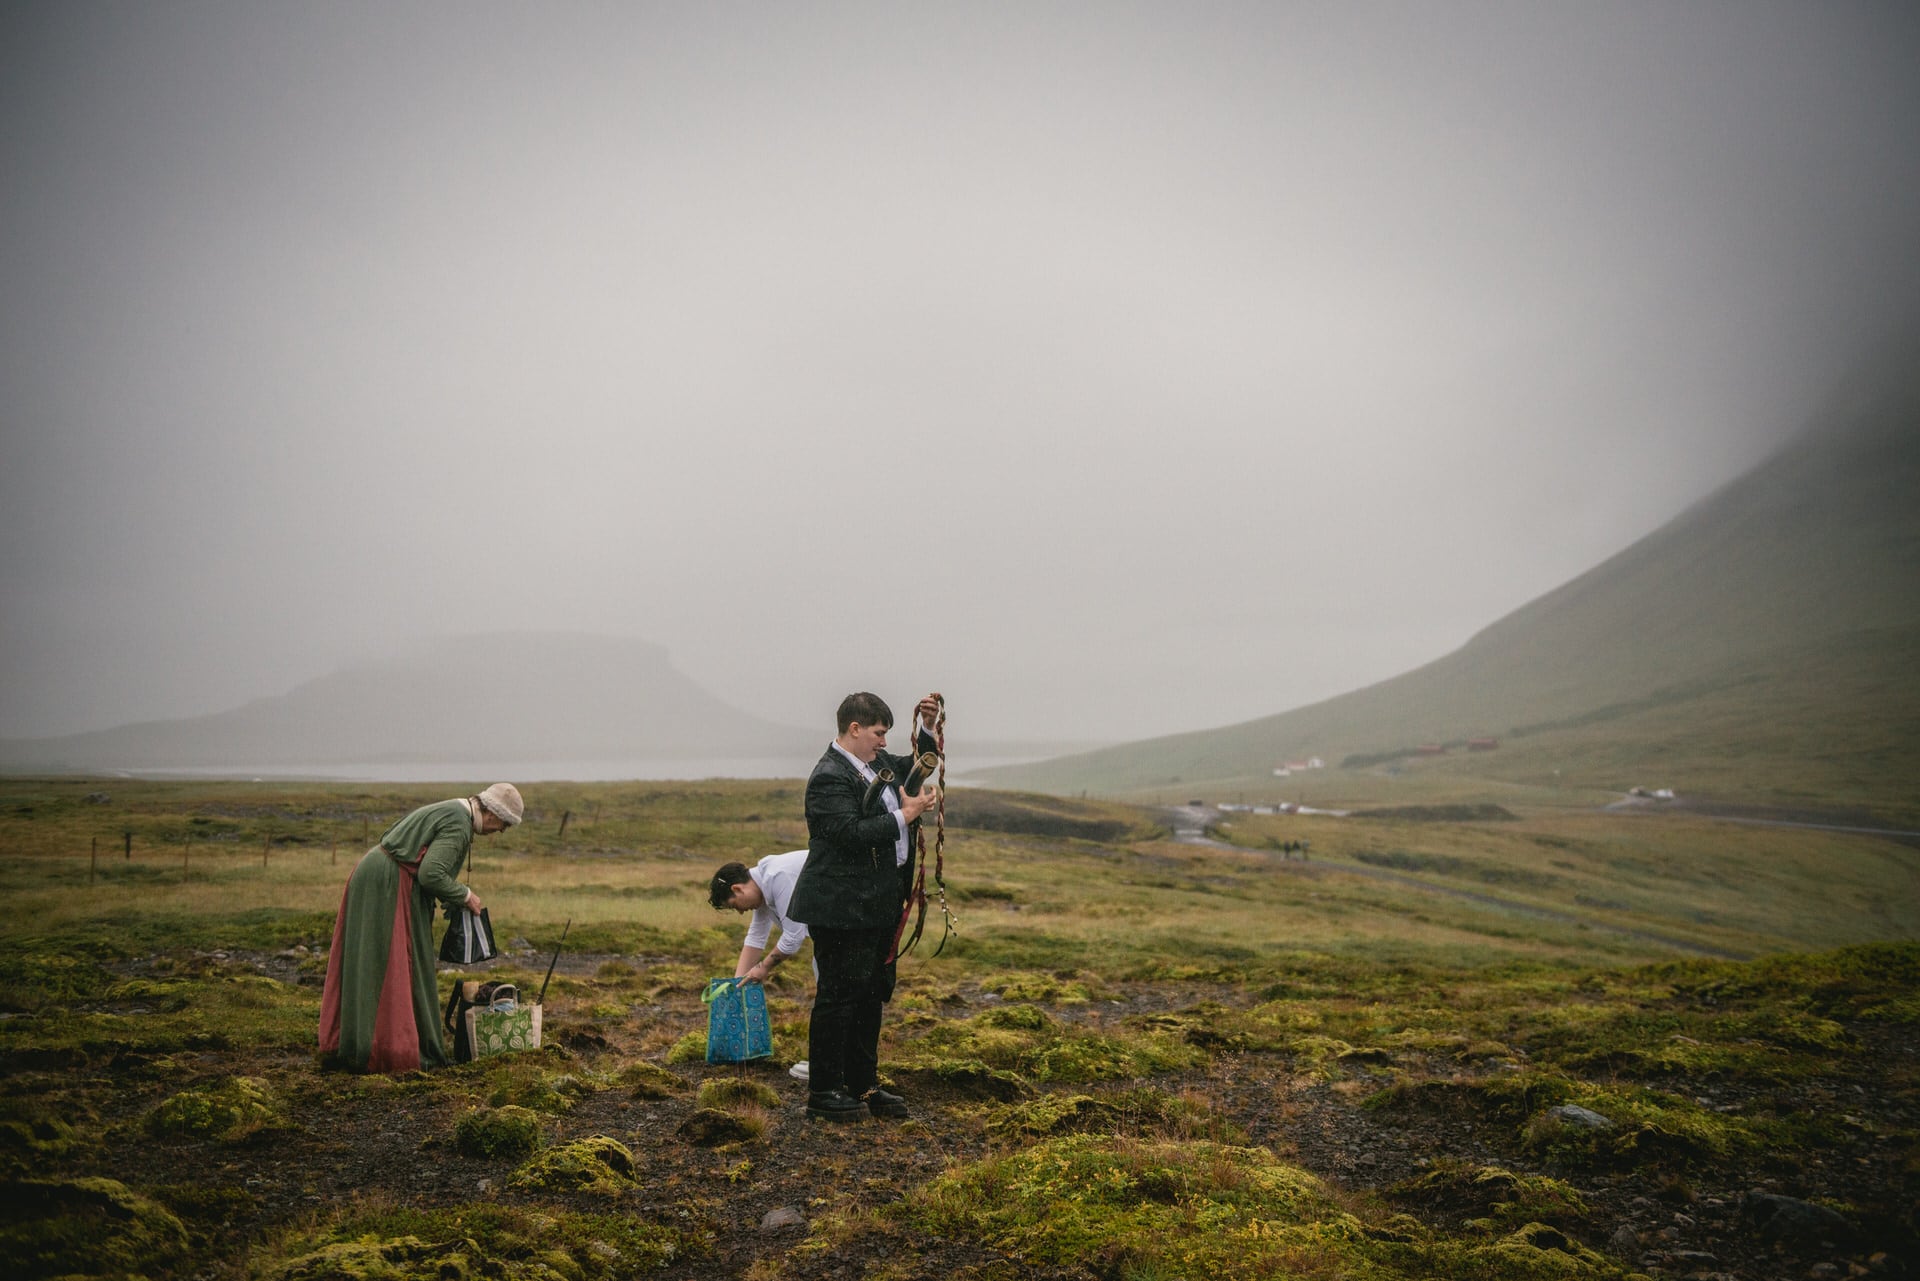 Preparation of a Pagan elopement ceremony in Iceland